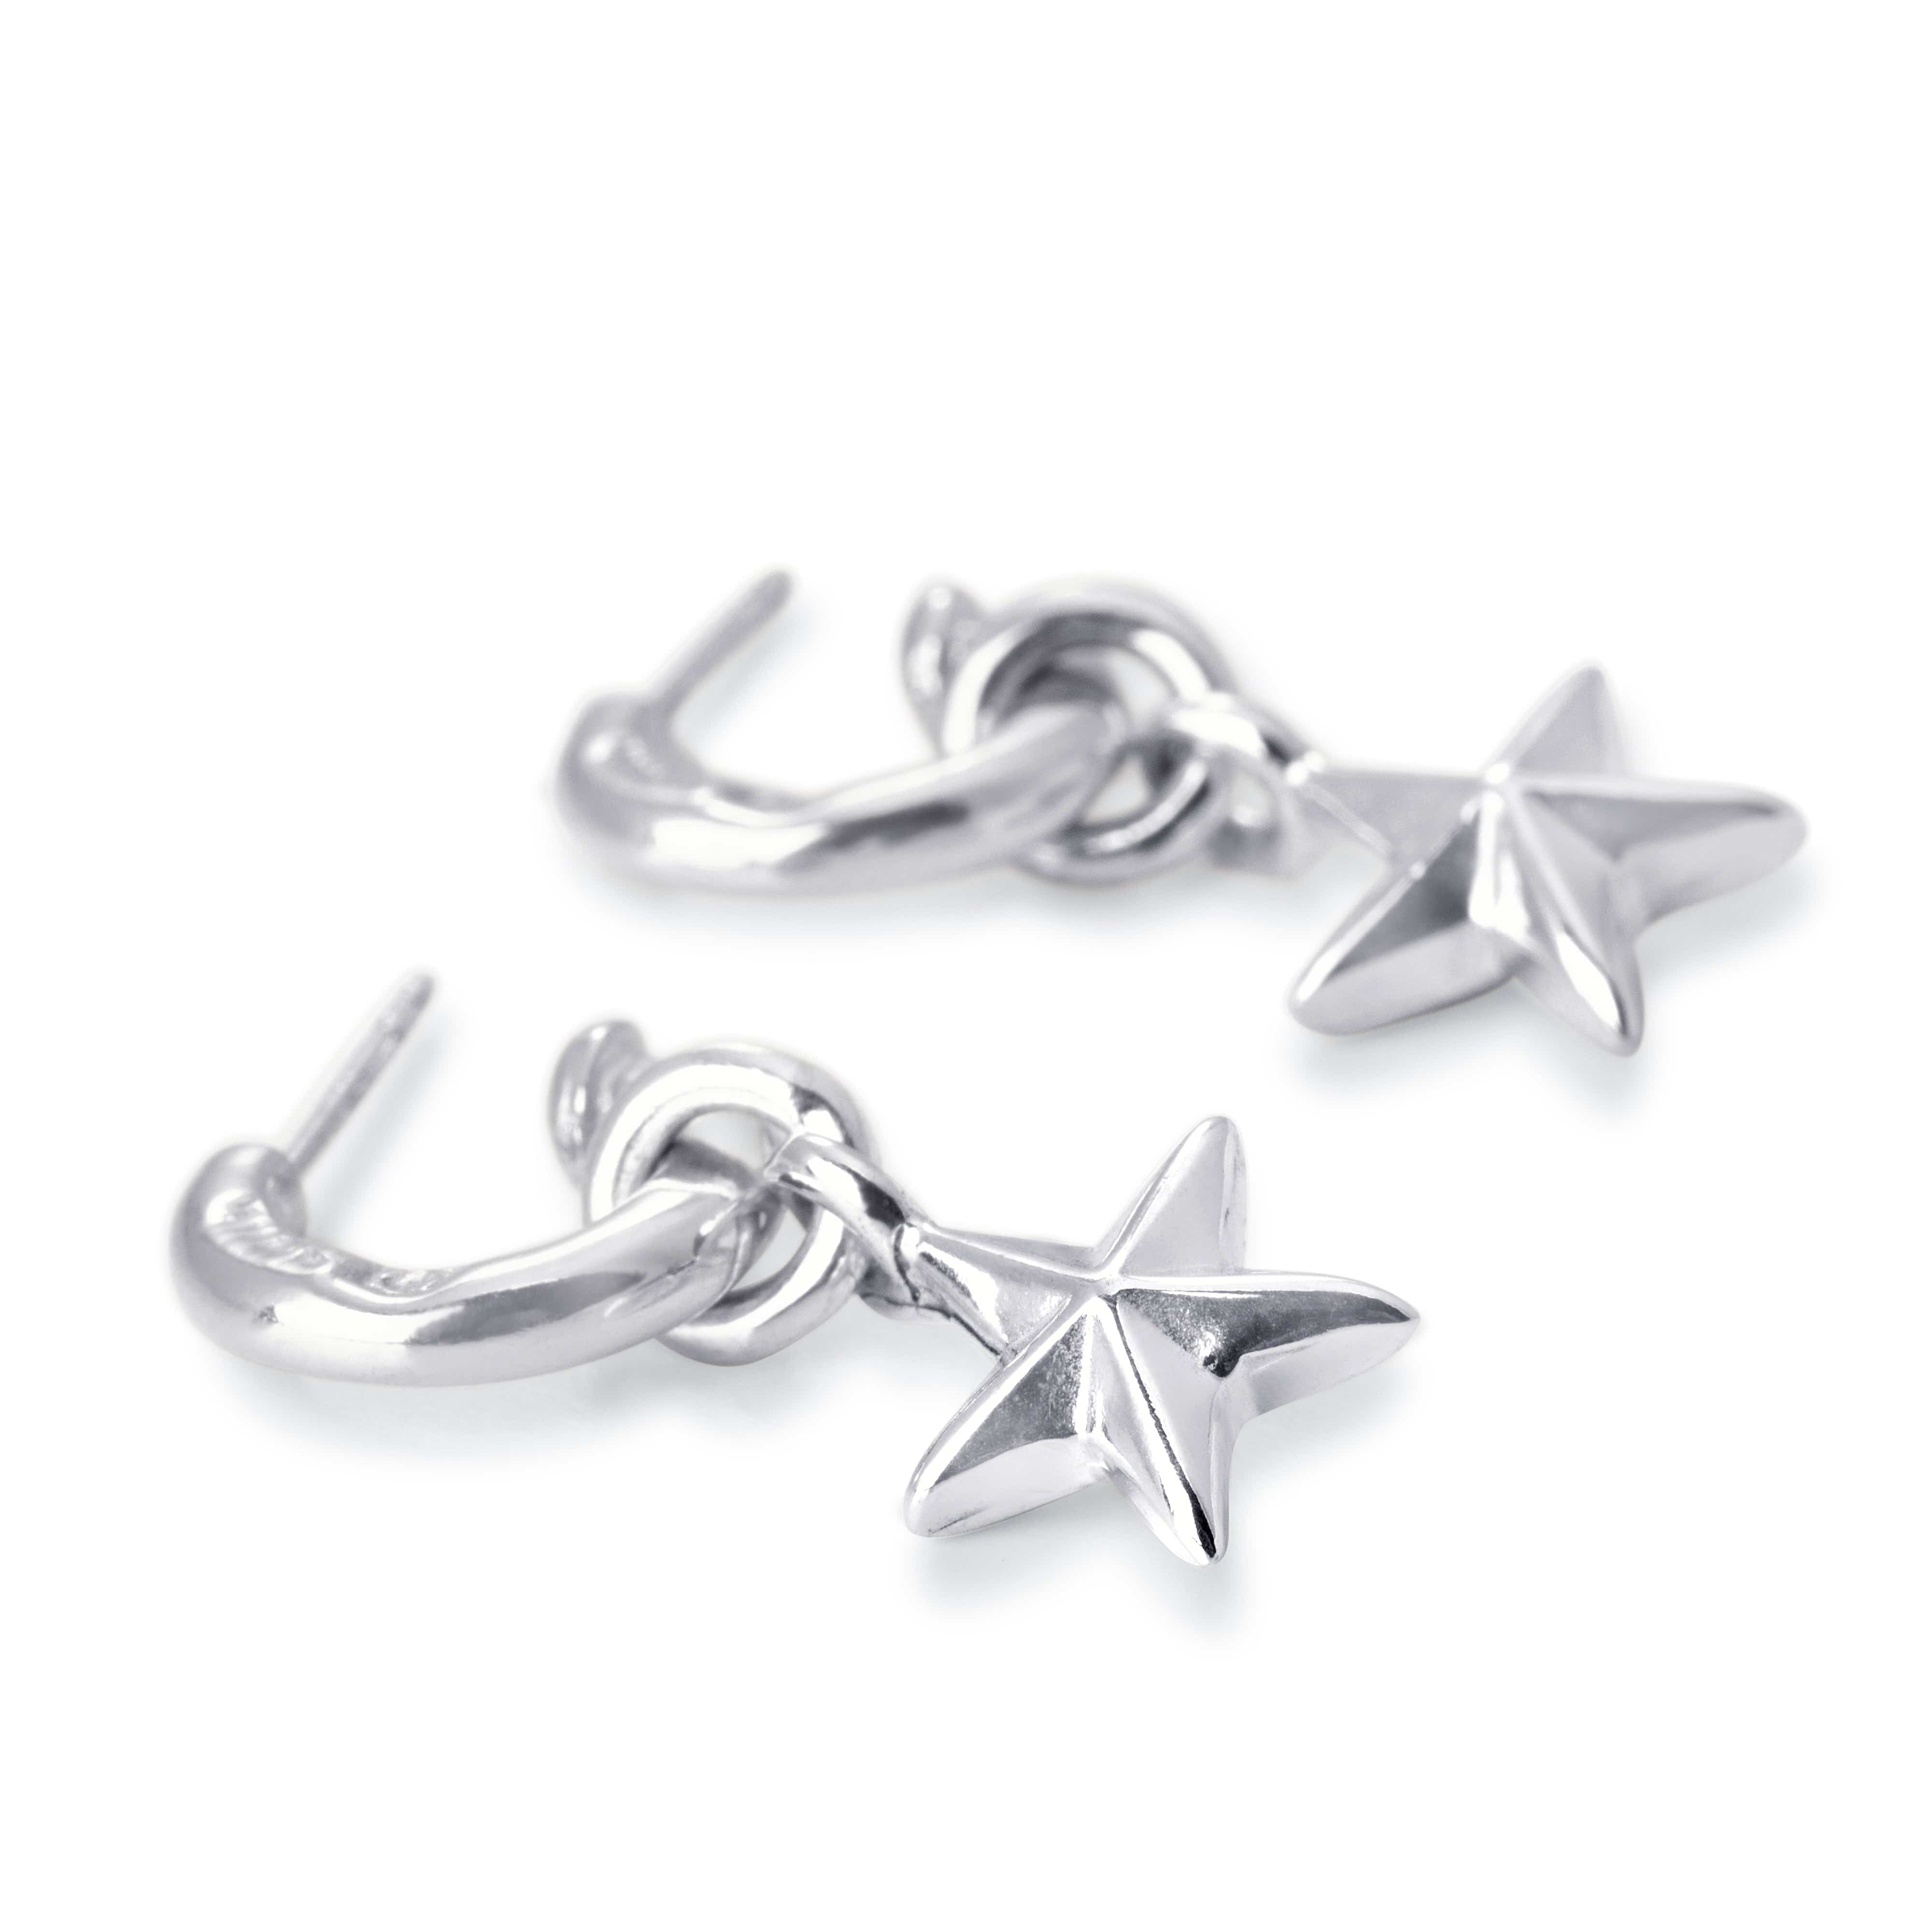 Solid sterling silver hoop stud with hanging star charm.